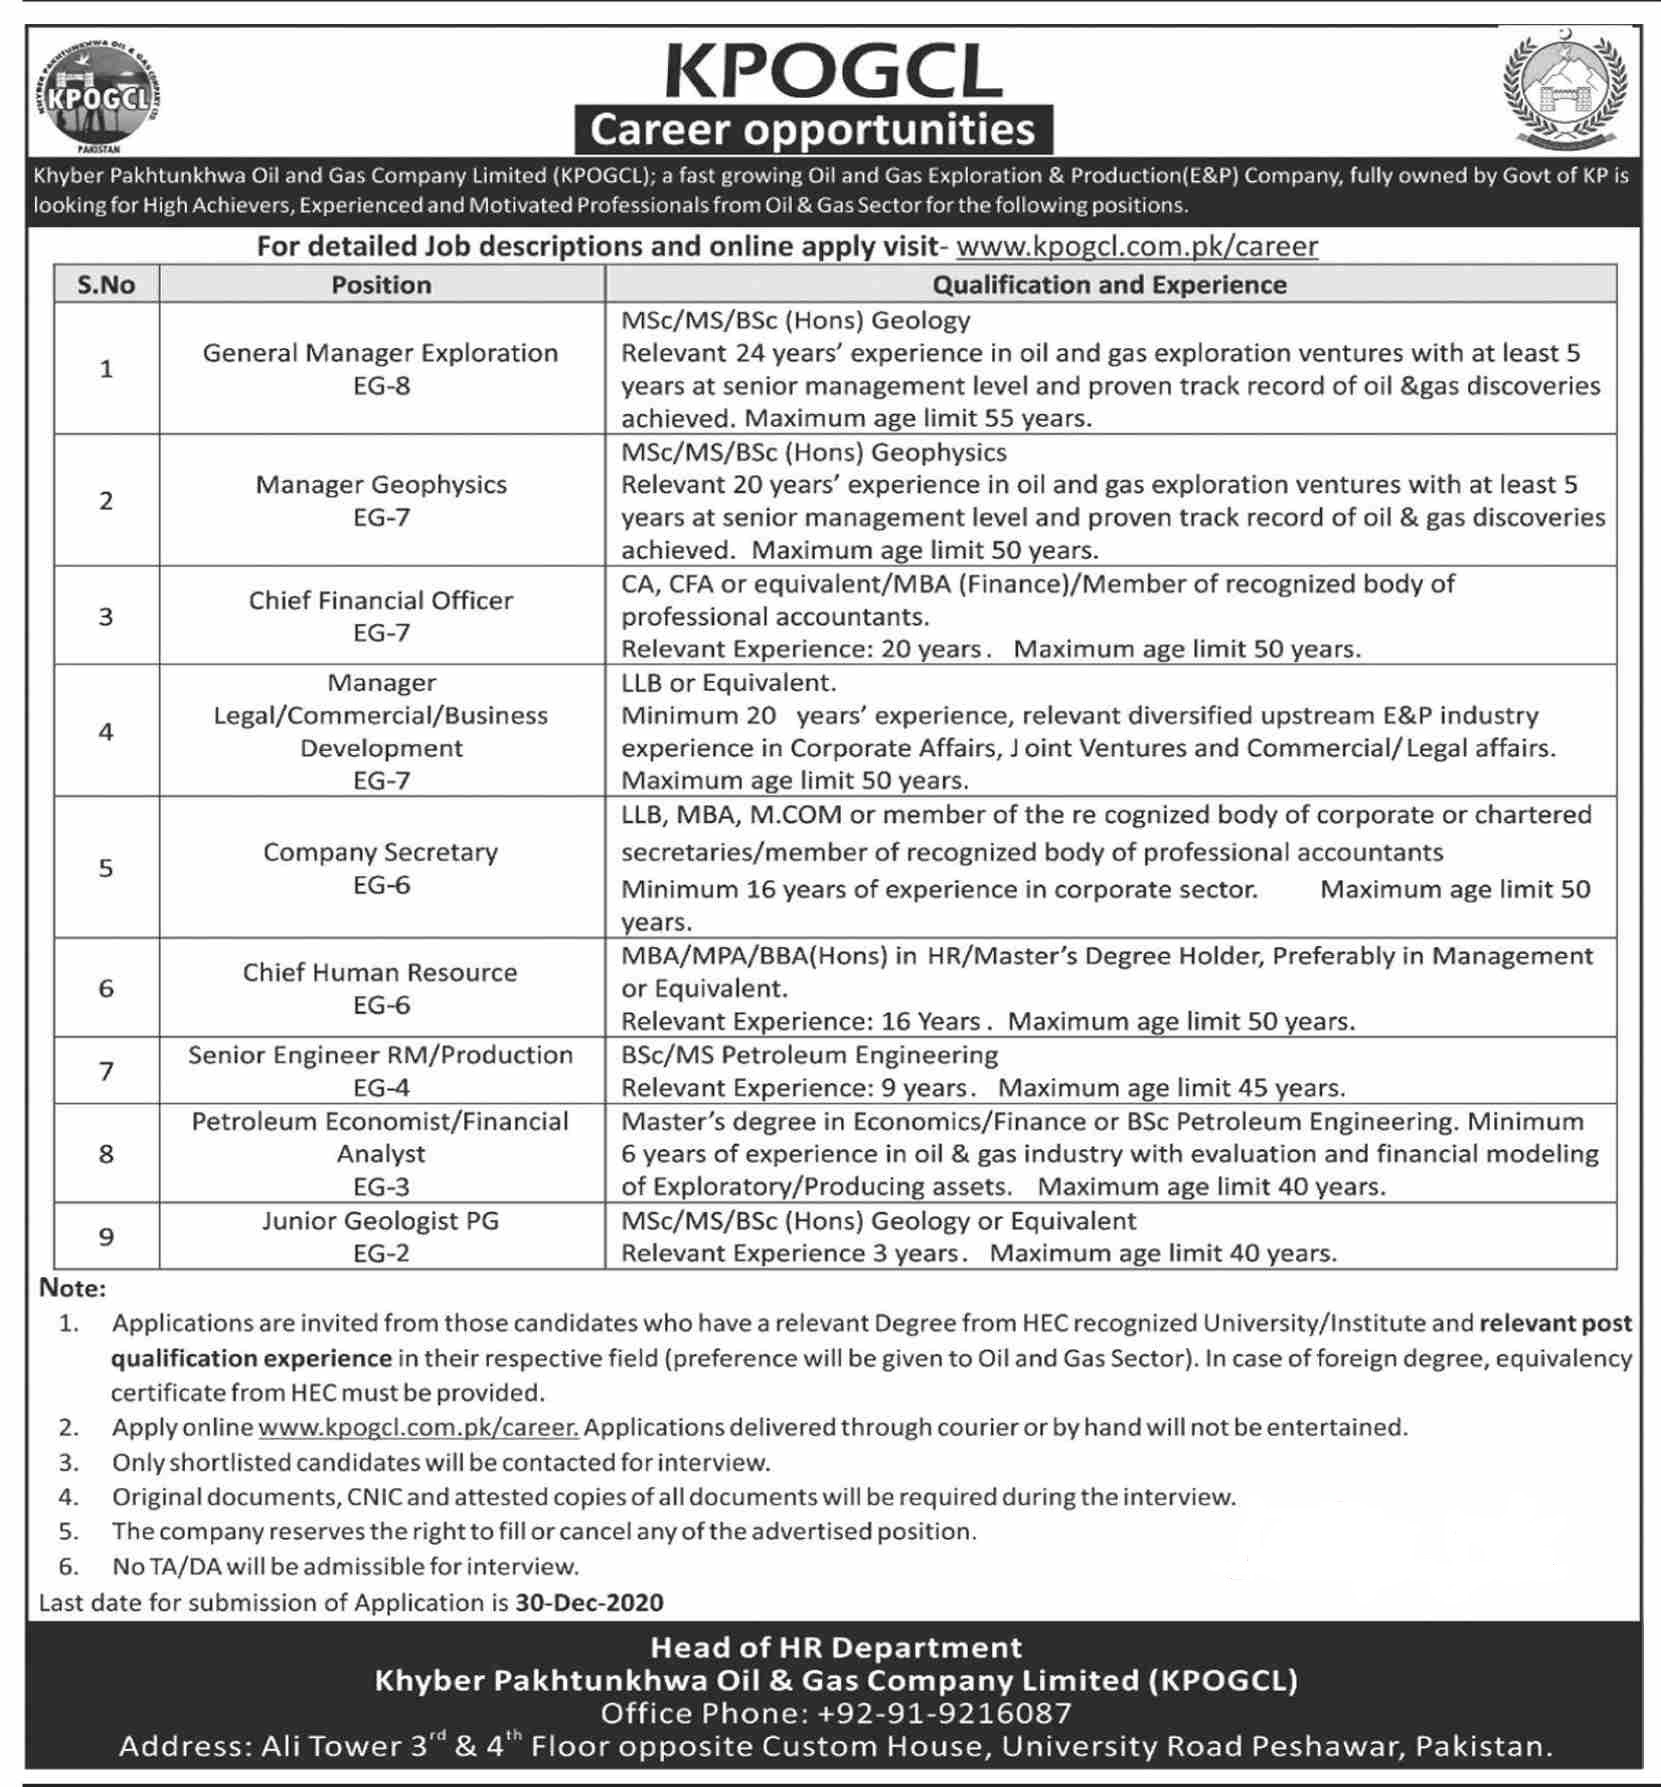 KPOGCL Jobs in Khyber Pakhtunkhwa Oil and Gas Company